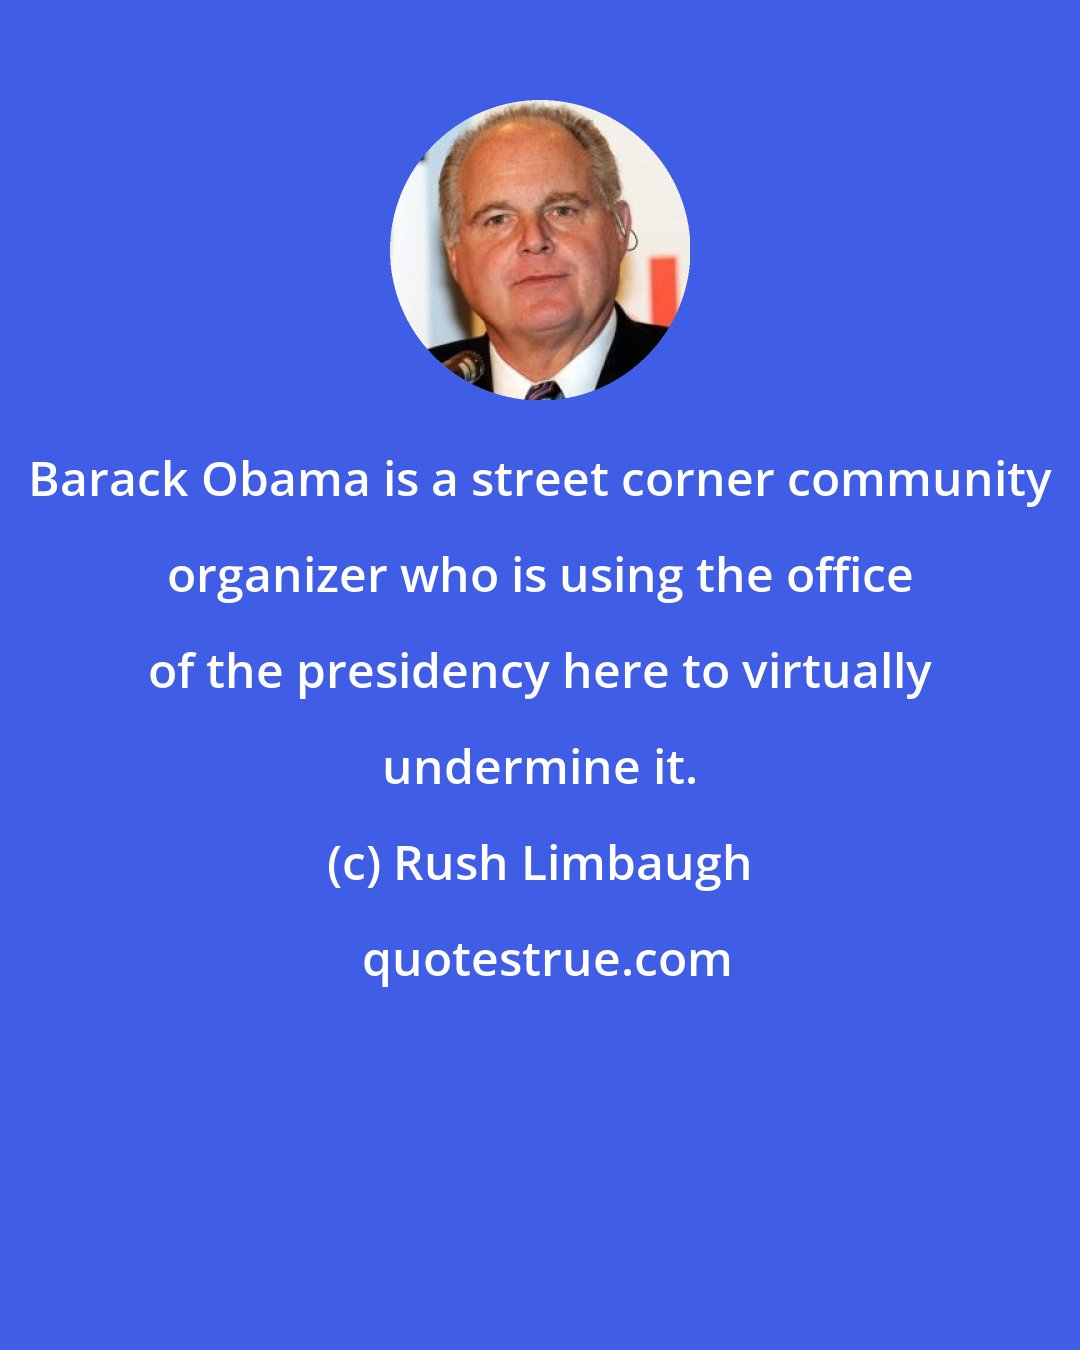 Rush Limbaugh: Barack Obama is a street corner community organizer who is using the office of the presidency here to virtually undermine it.